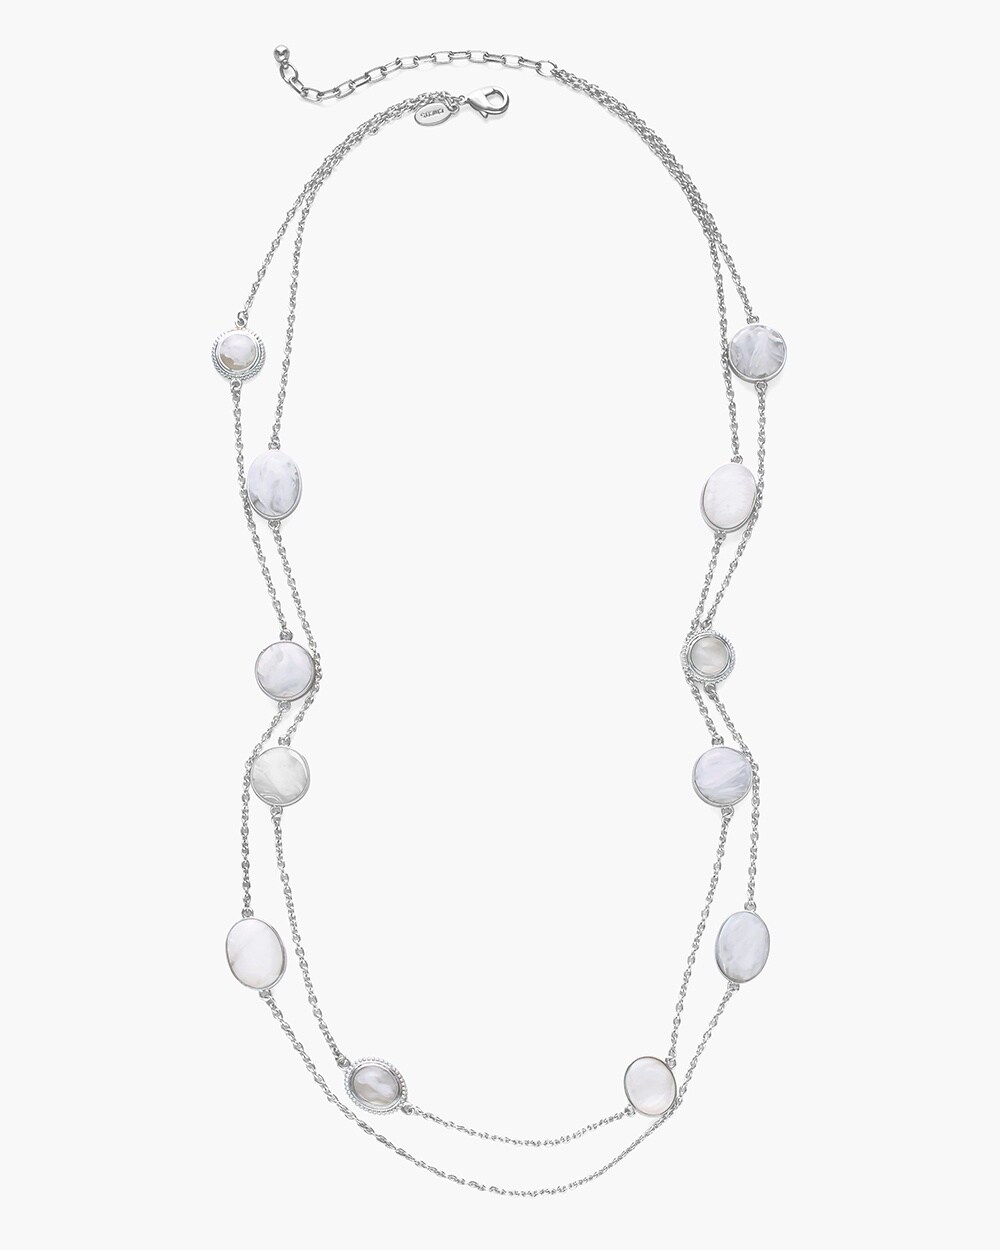 White and Silver-Tone Long Necklace